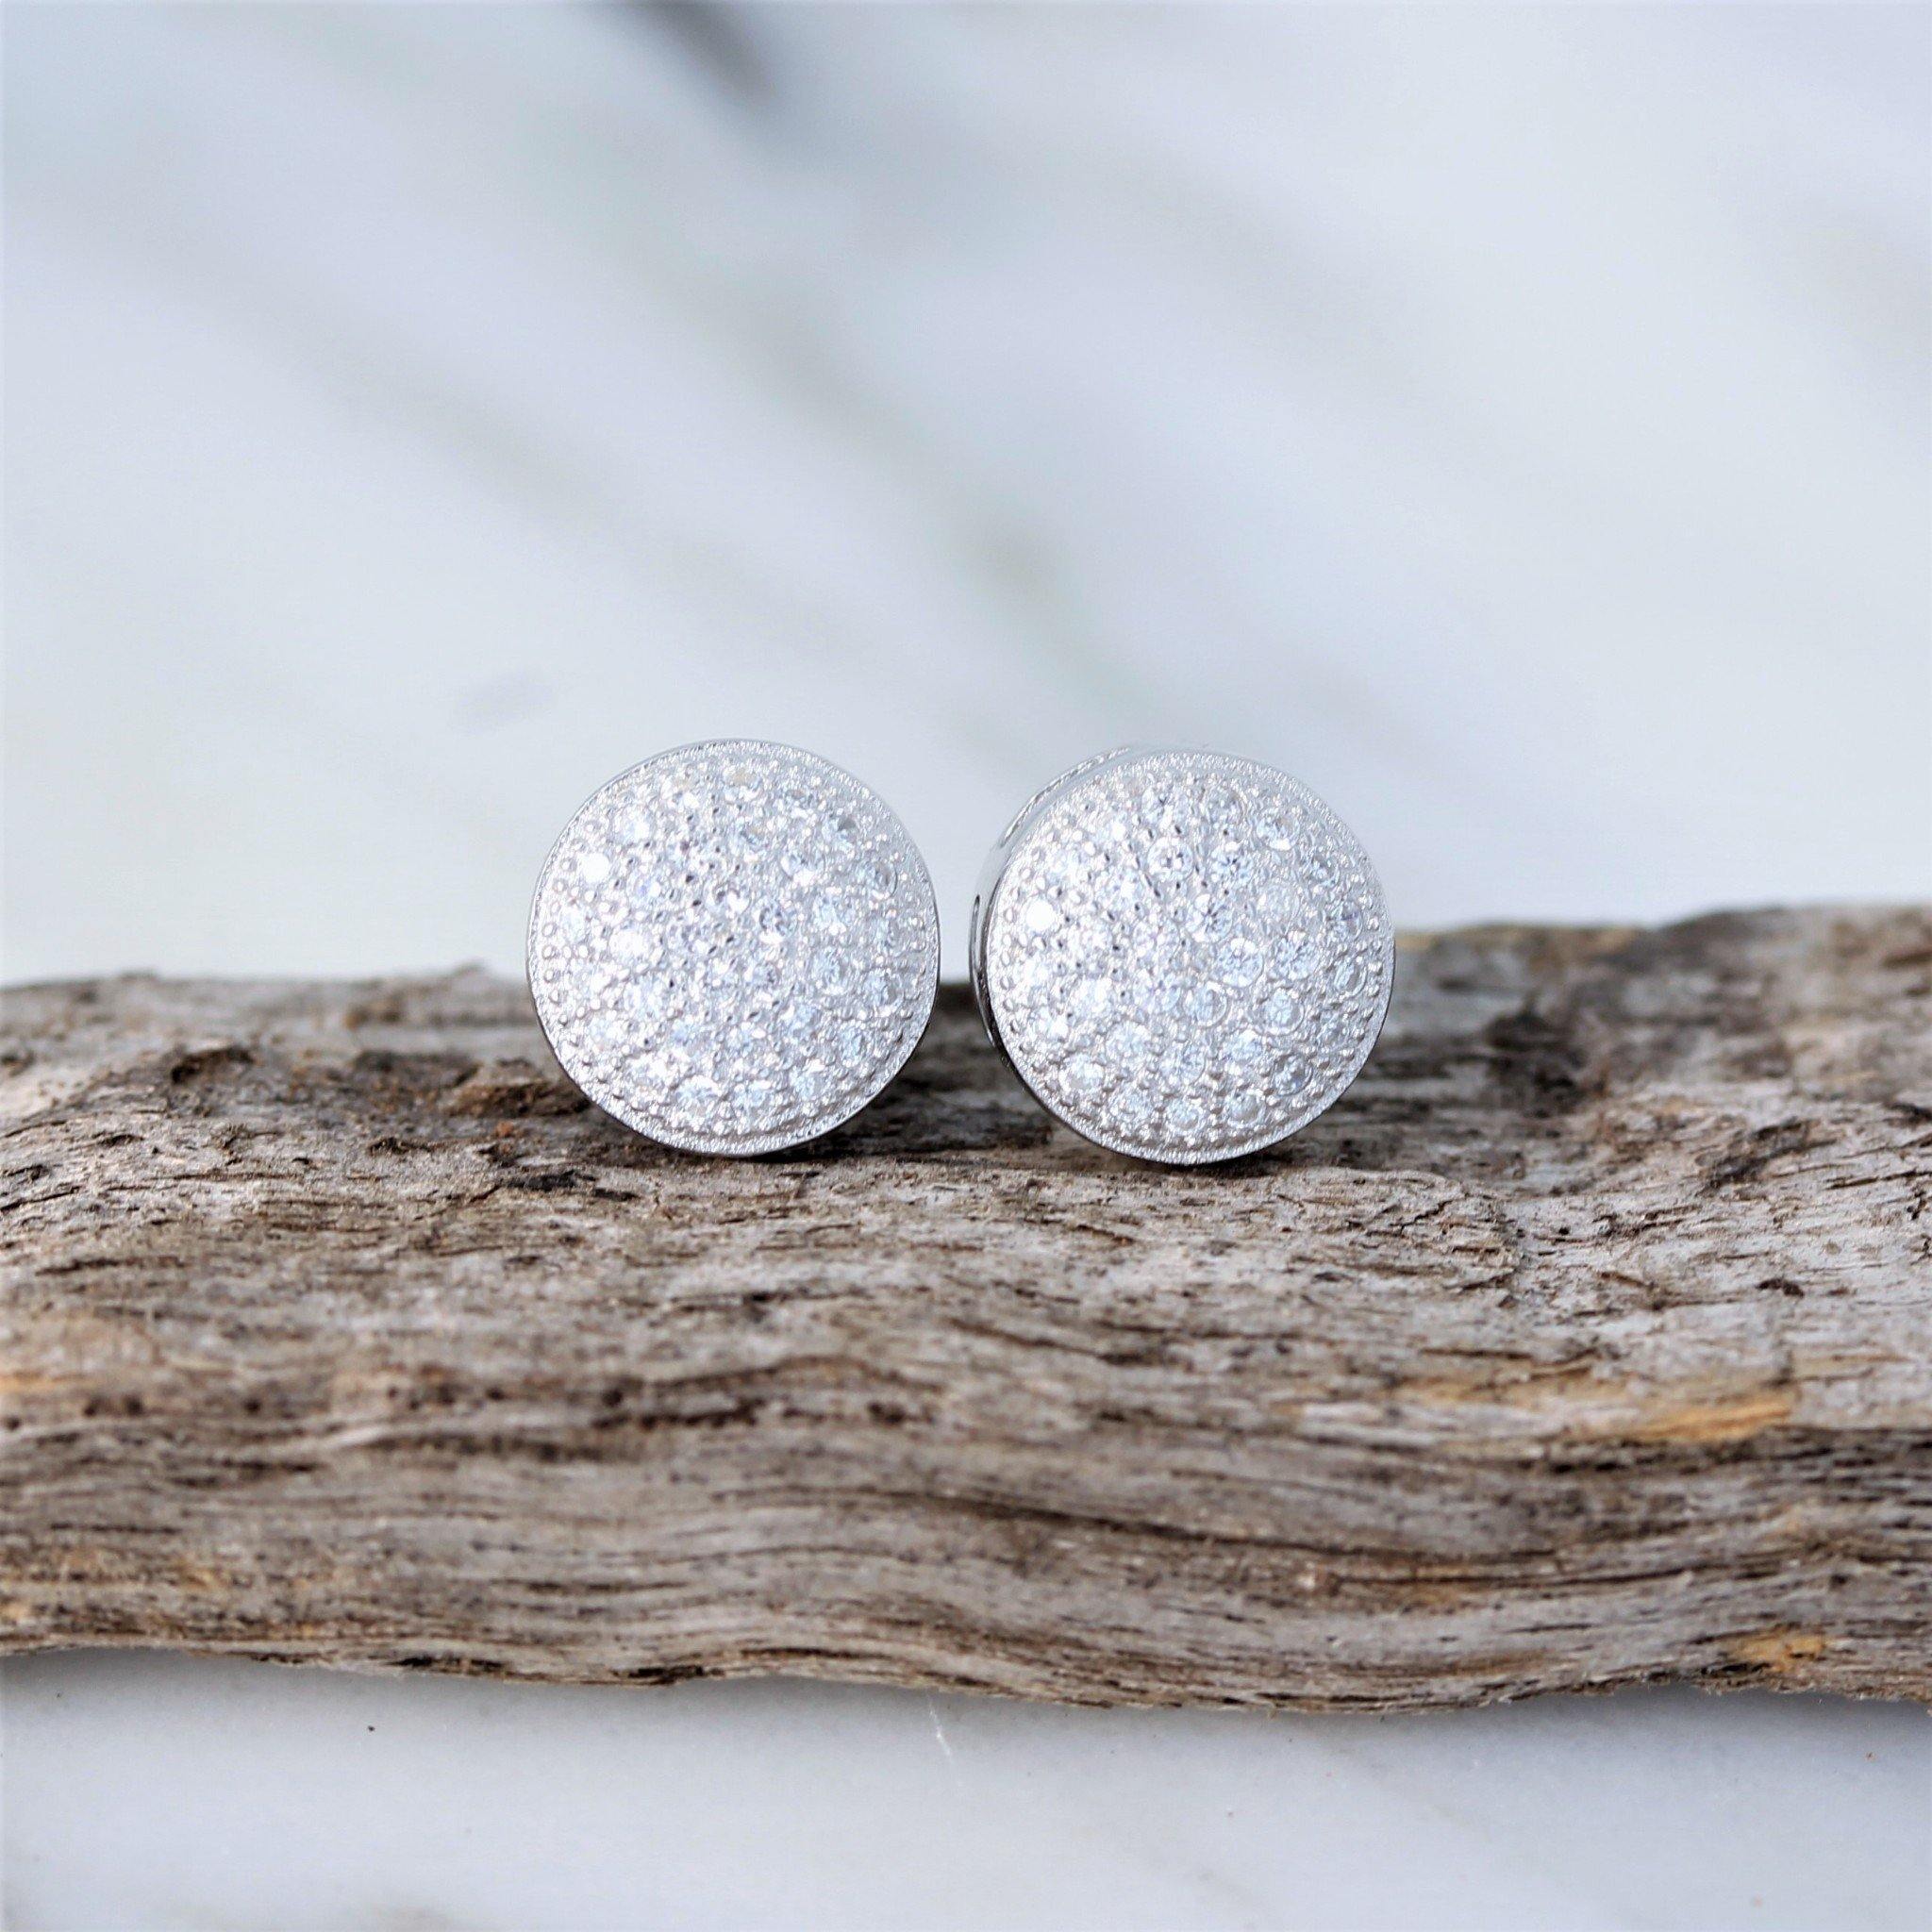 Sterling Silver Bridal Wedding 9mm Round Flat Disc CZ Pave Set Stud Earrings - STERLING SILVER DESIGNS